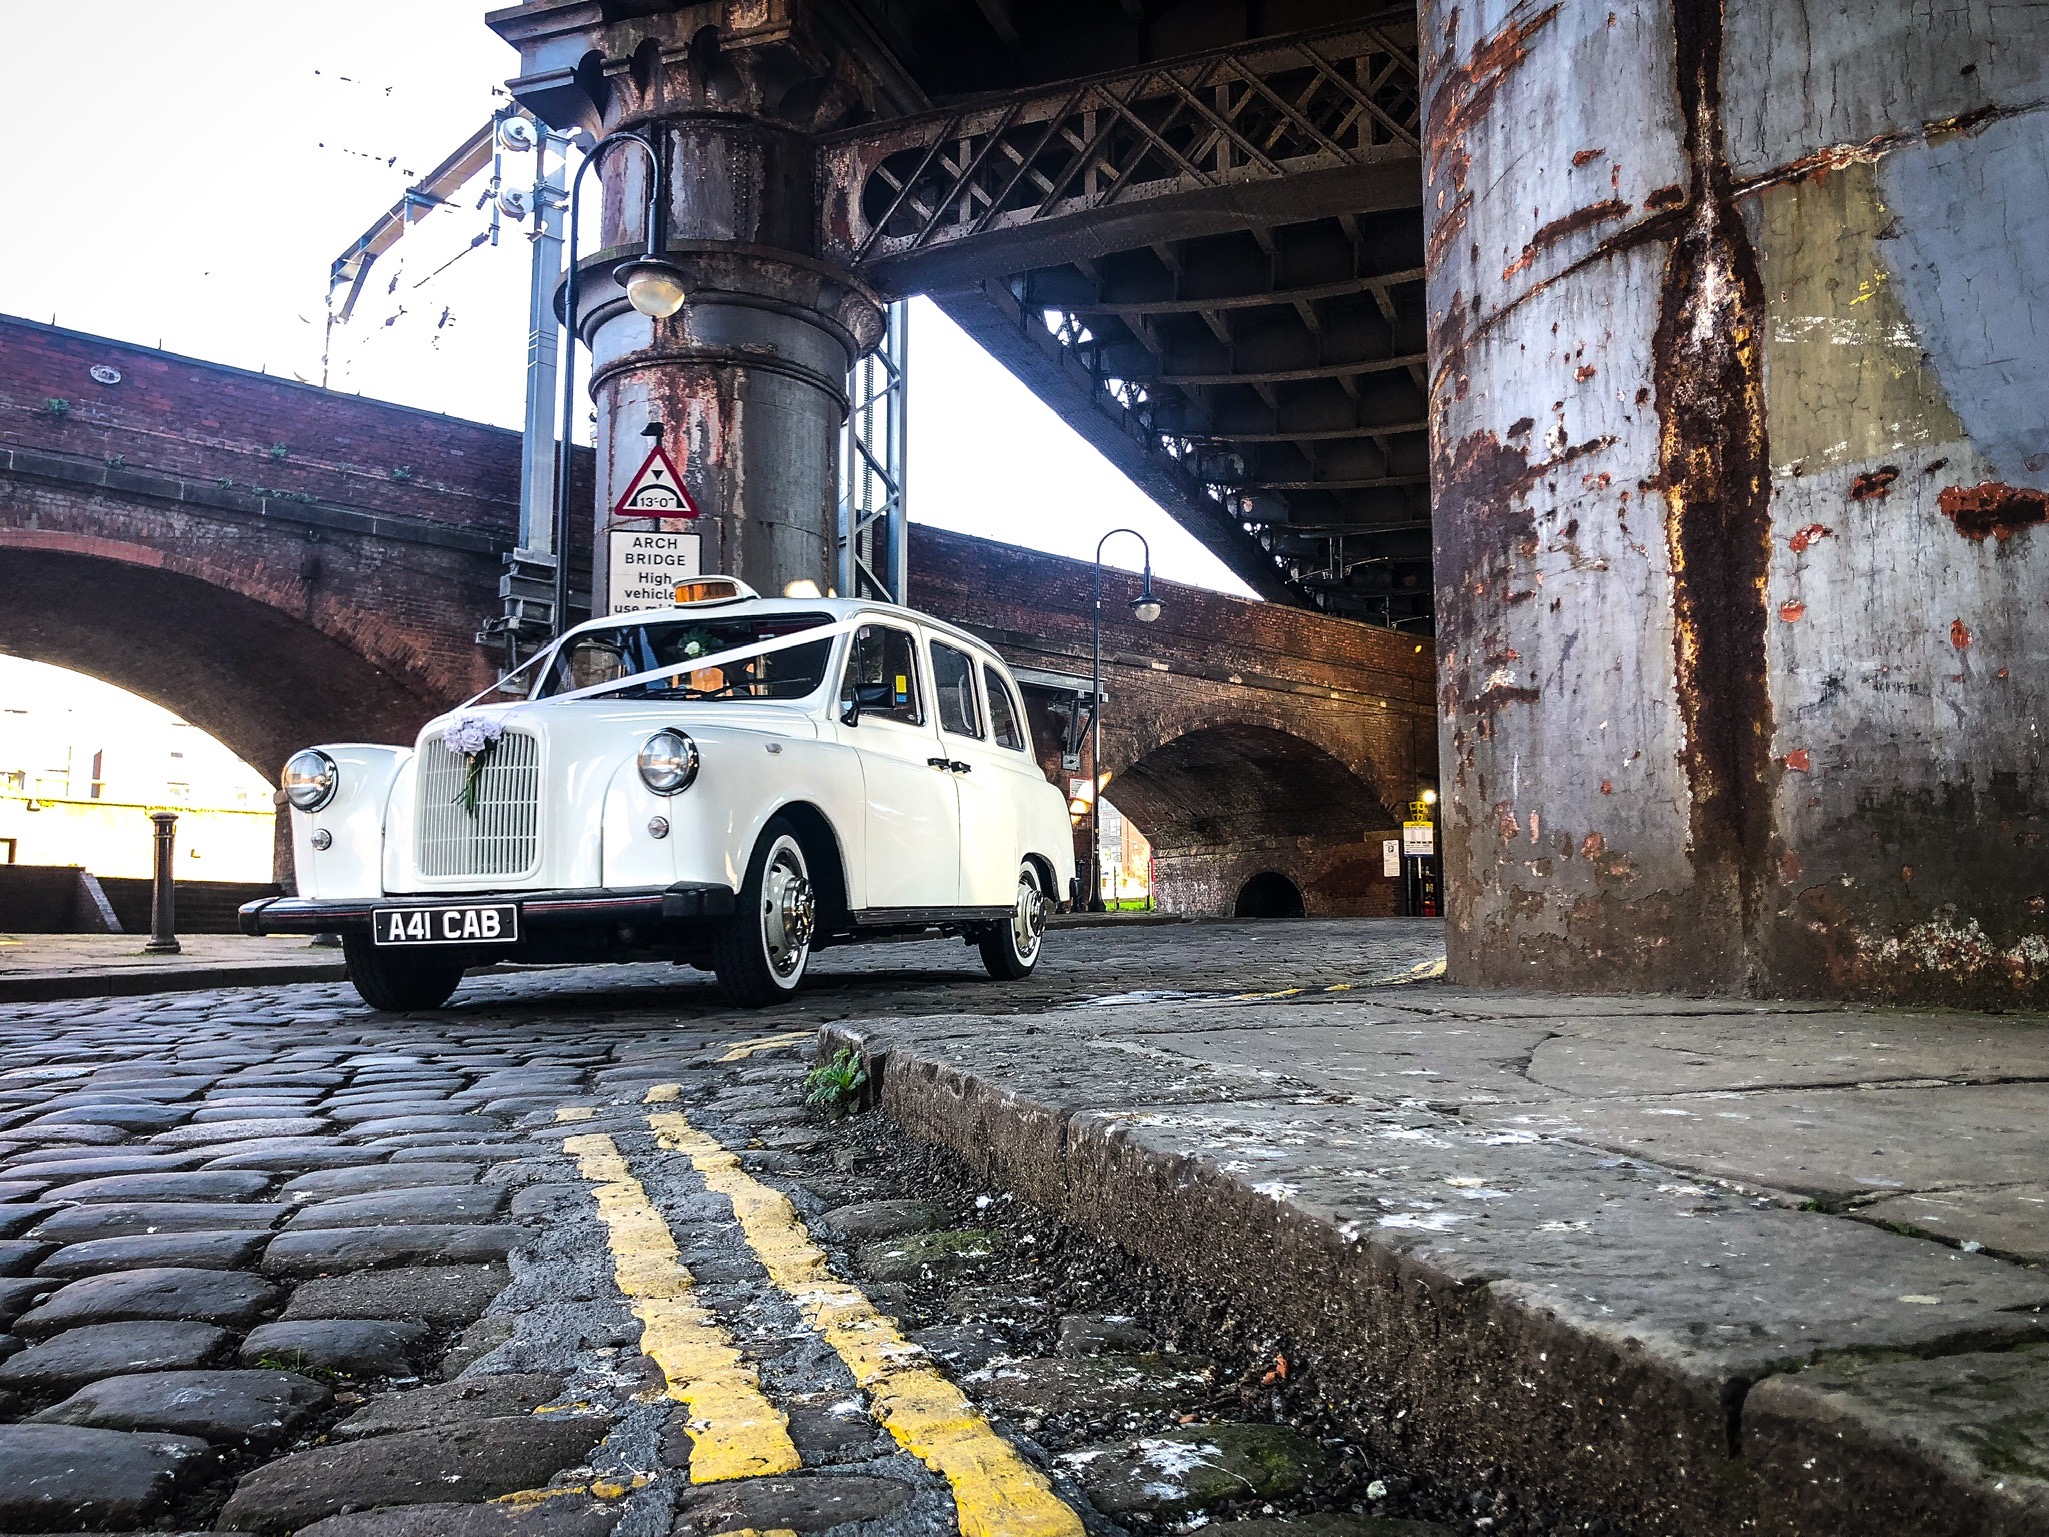 Manchester wedding cabs taxis cars